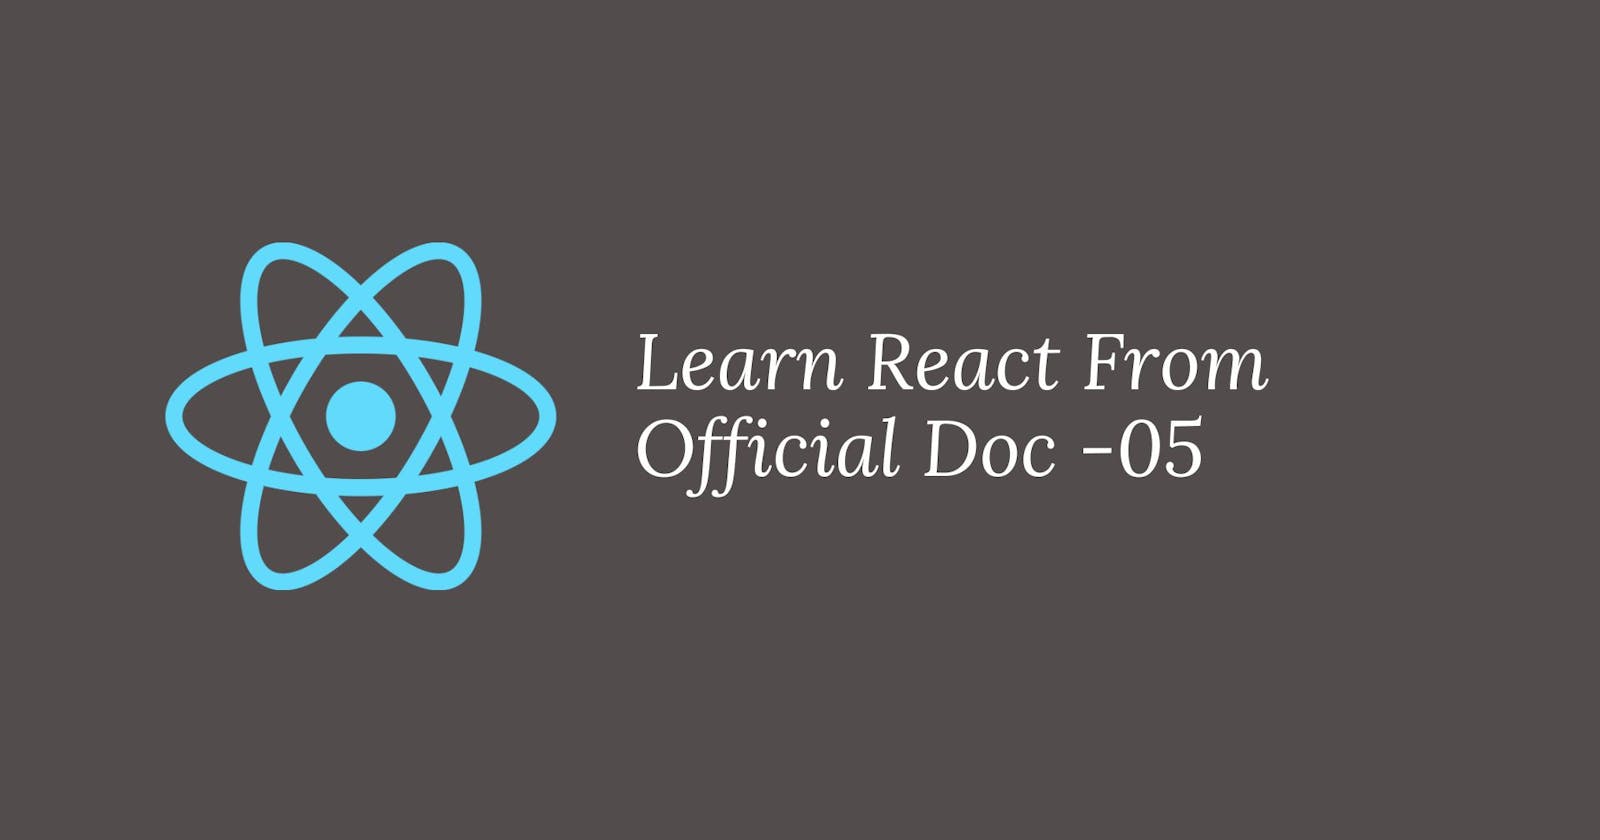 Learn React From Official Doc -05